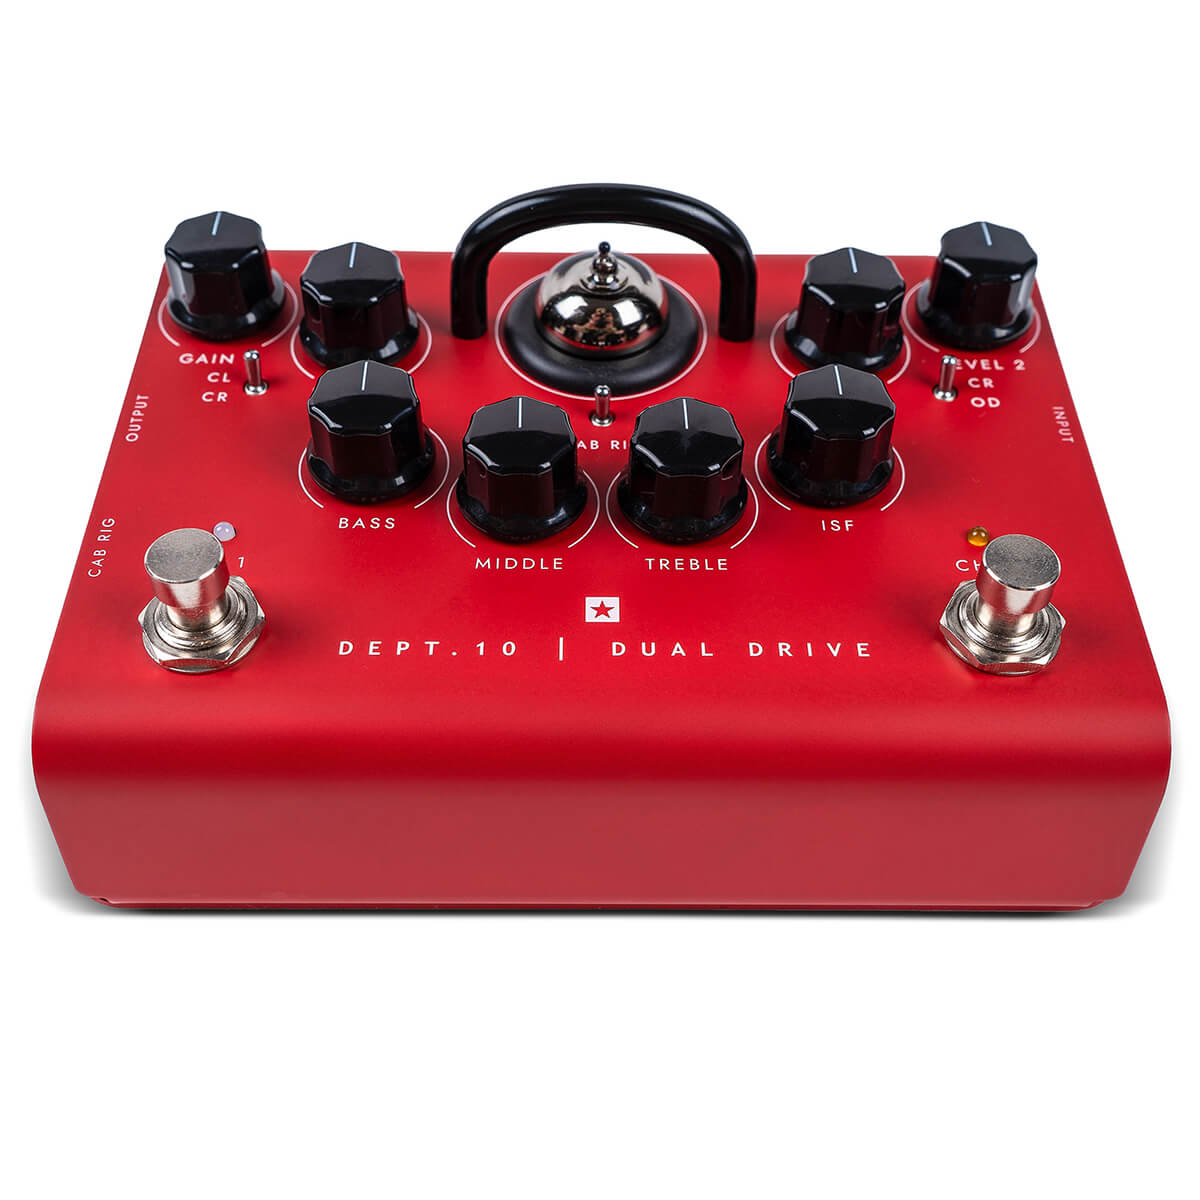 Blackstar Dept 10 Dual Drive guitar pedal front in bold red